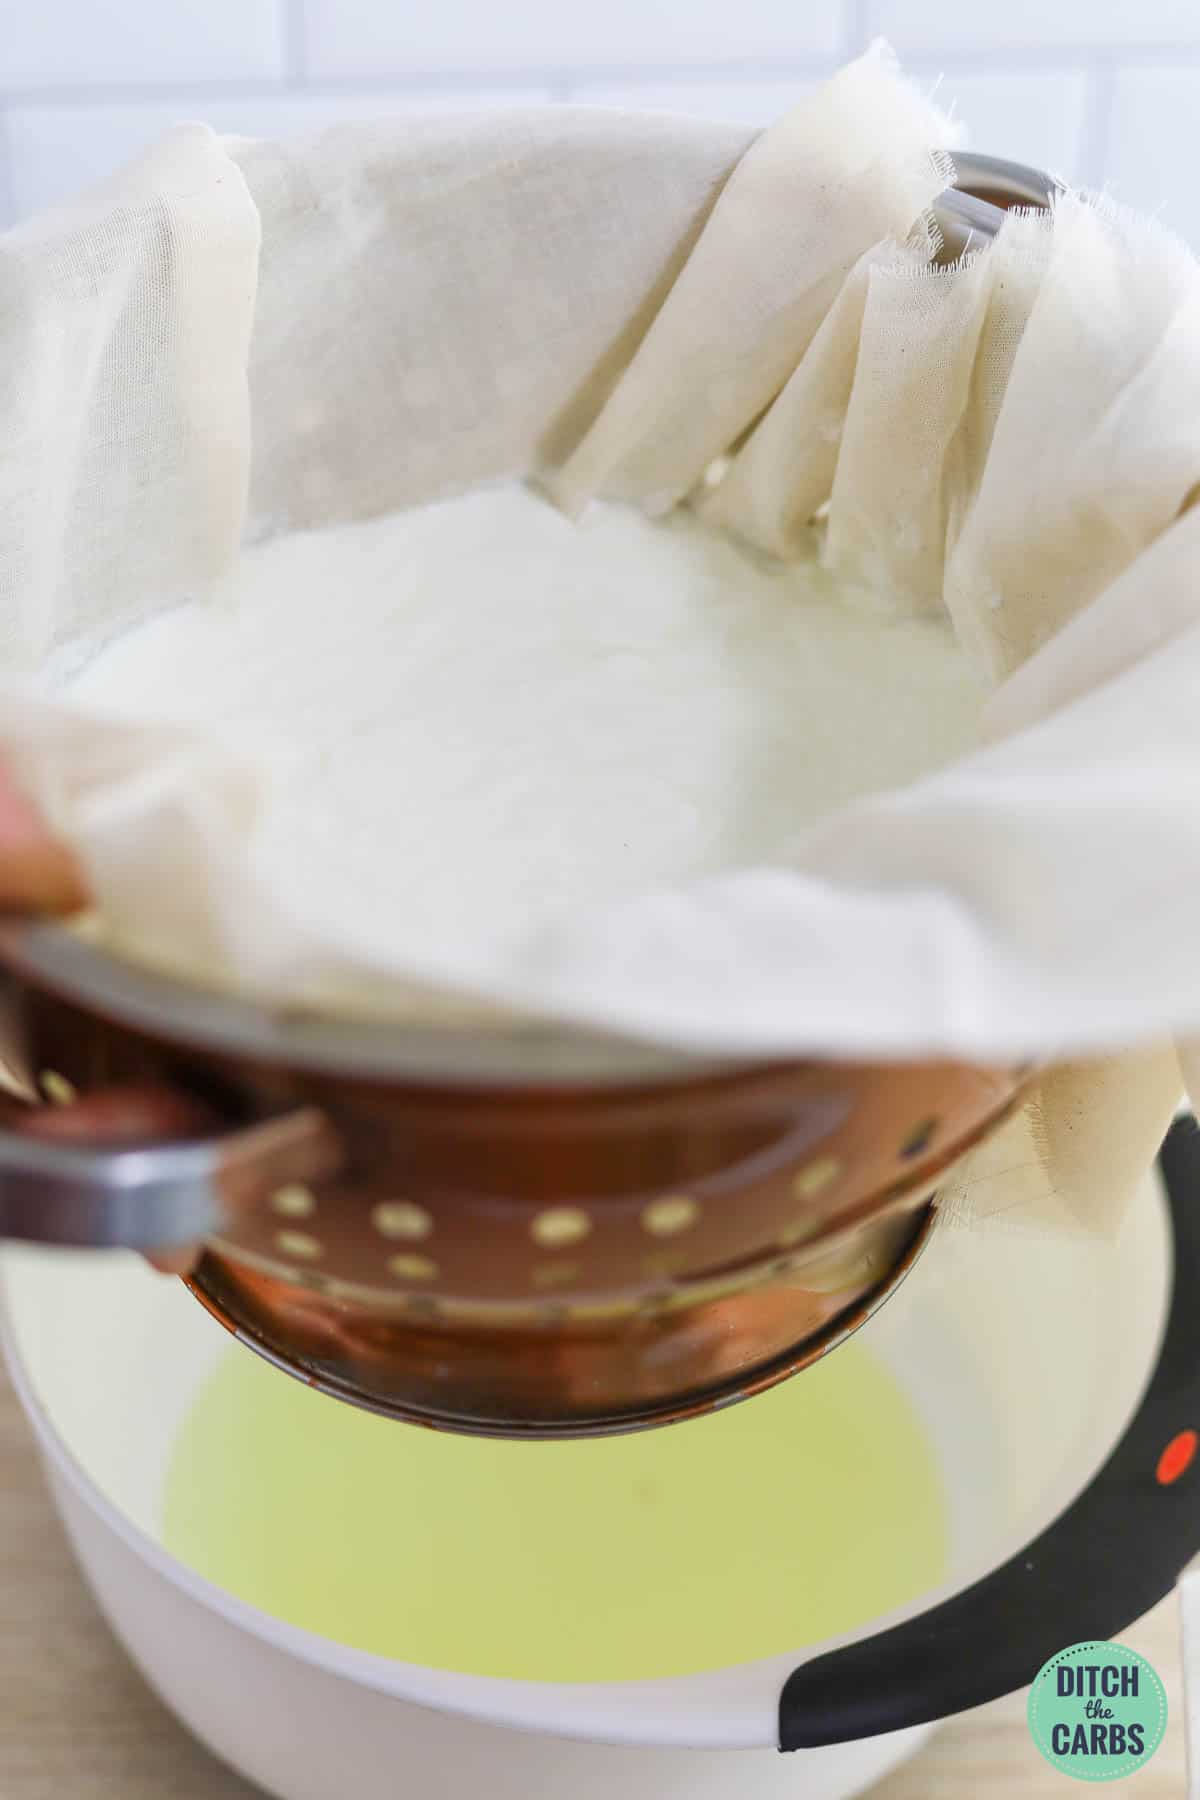 Straining the whey from the yogurt using a colander and cheesecloth.